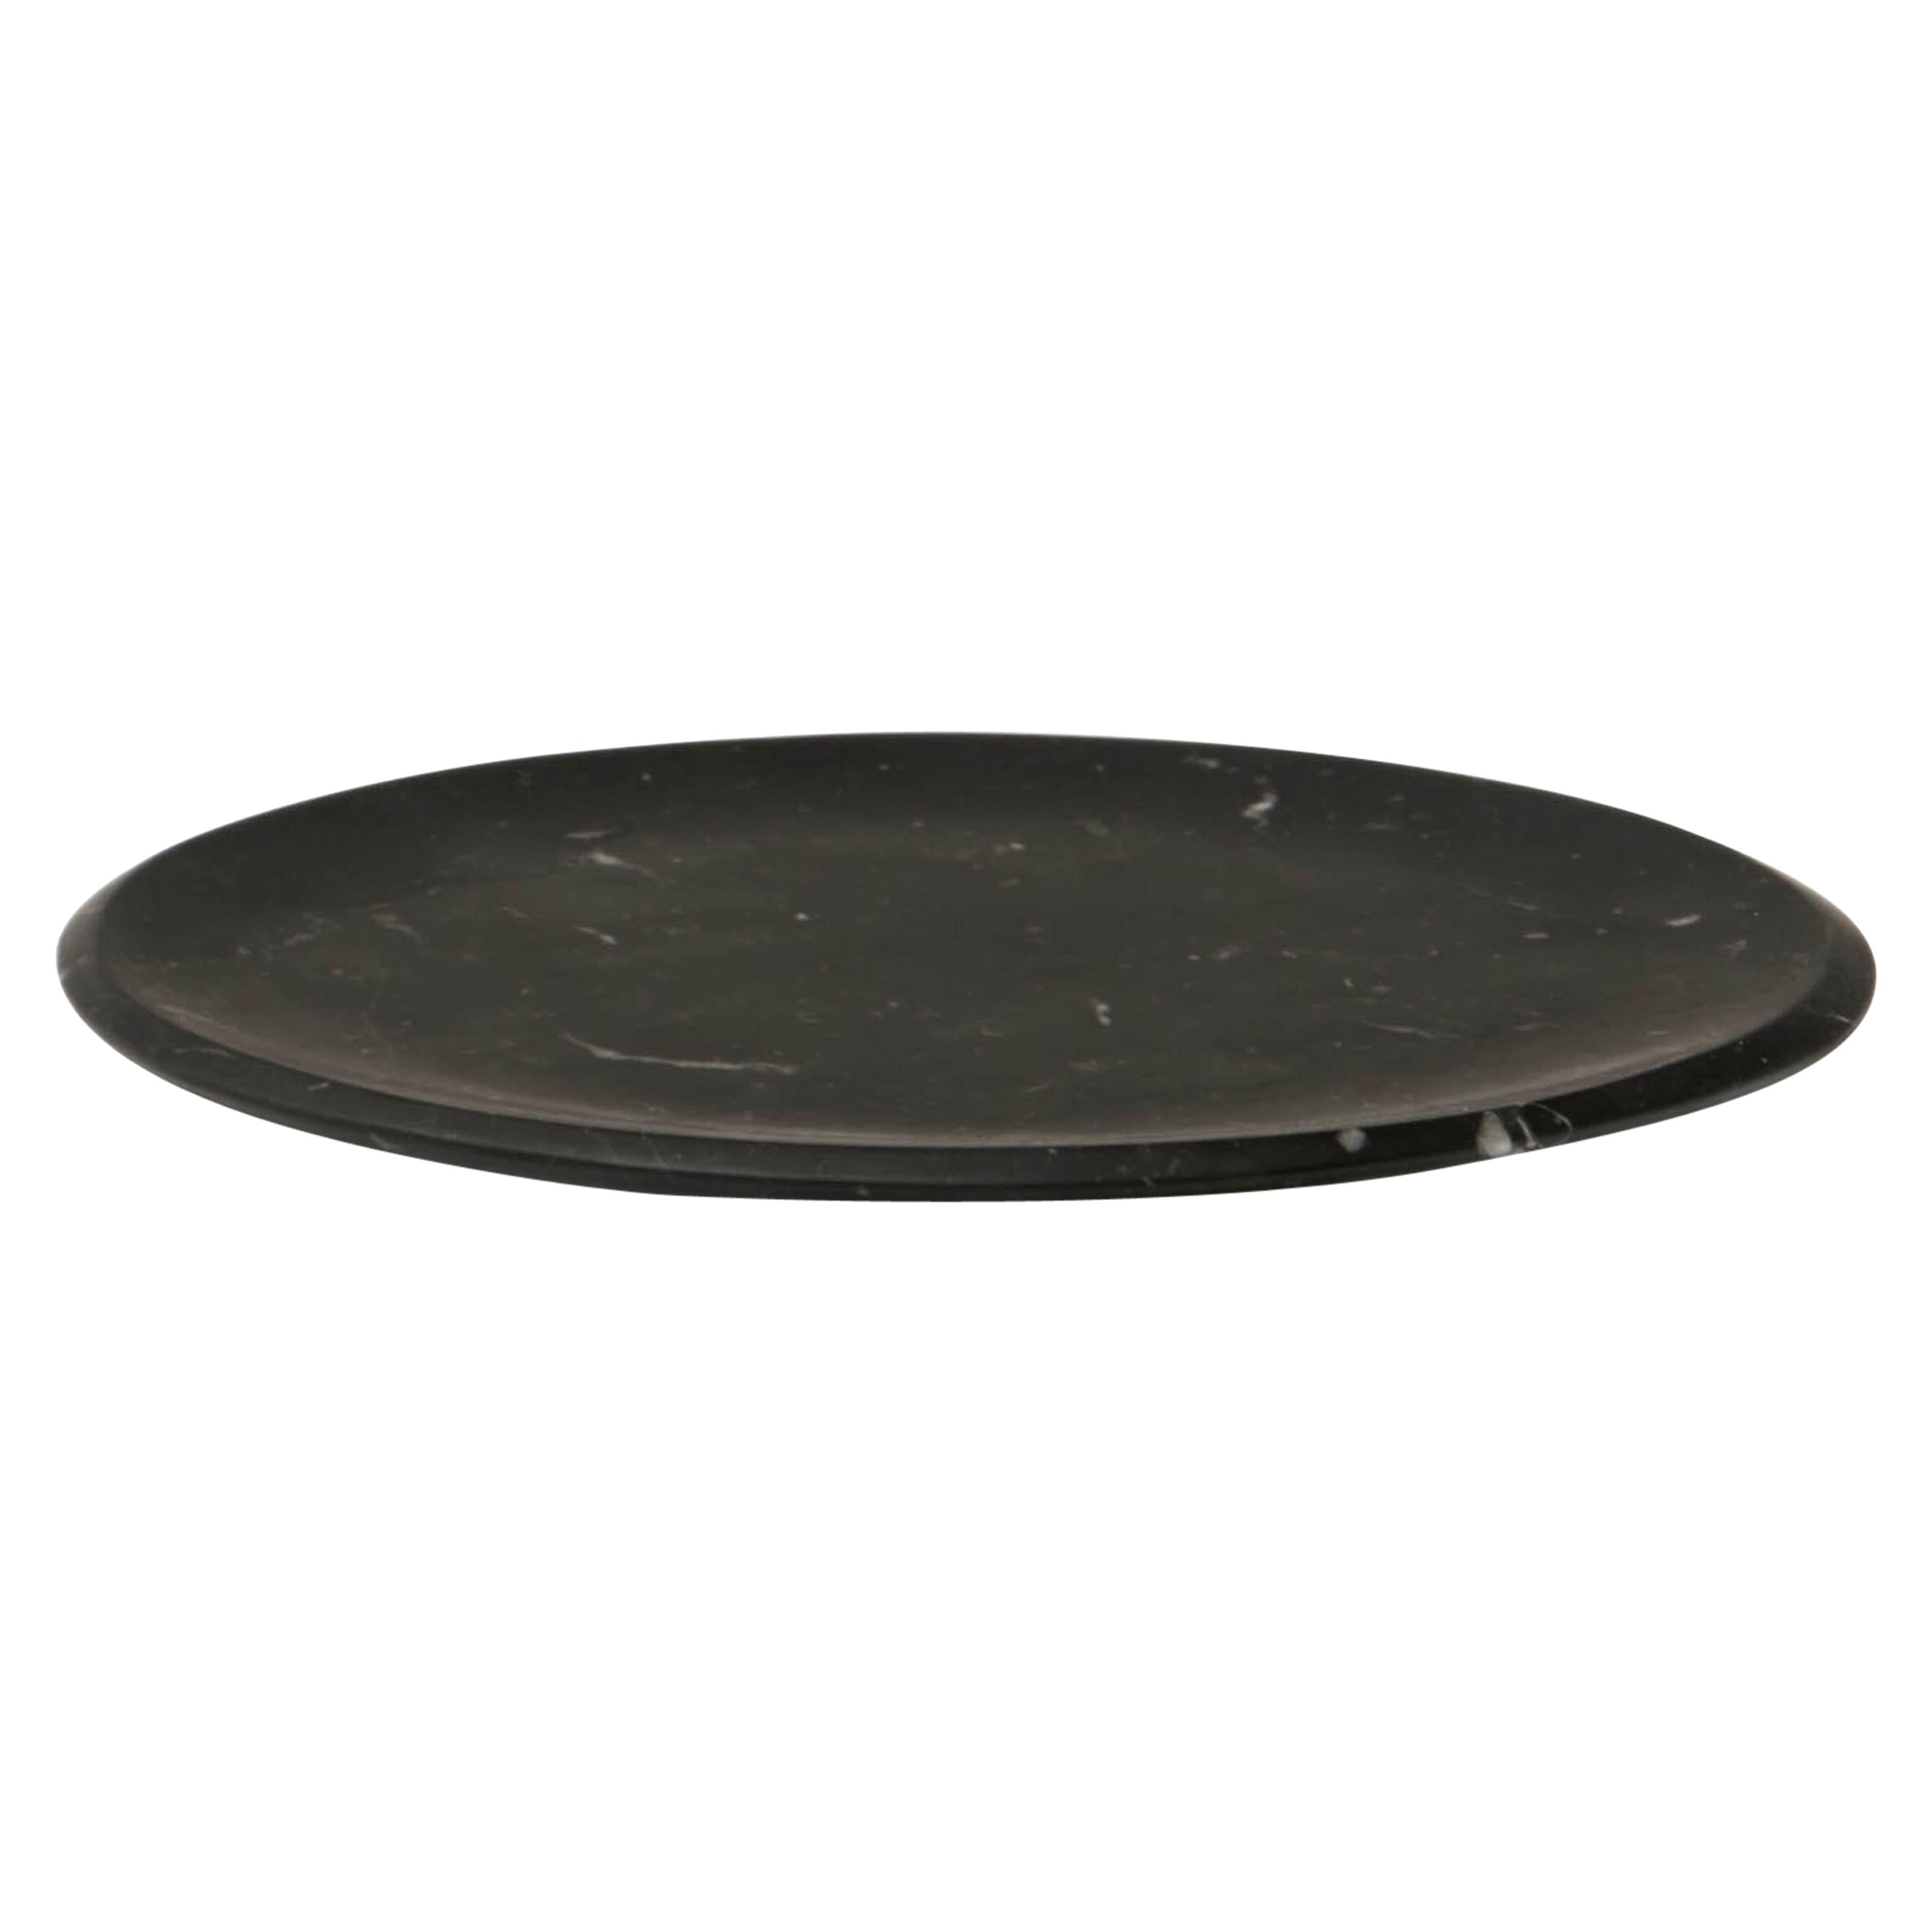 New Modern Dish in Black Marquinia Marble, creator Ivan Colominas, Stock For Sale